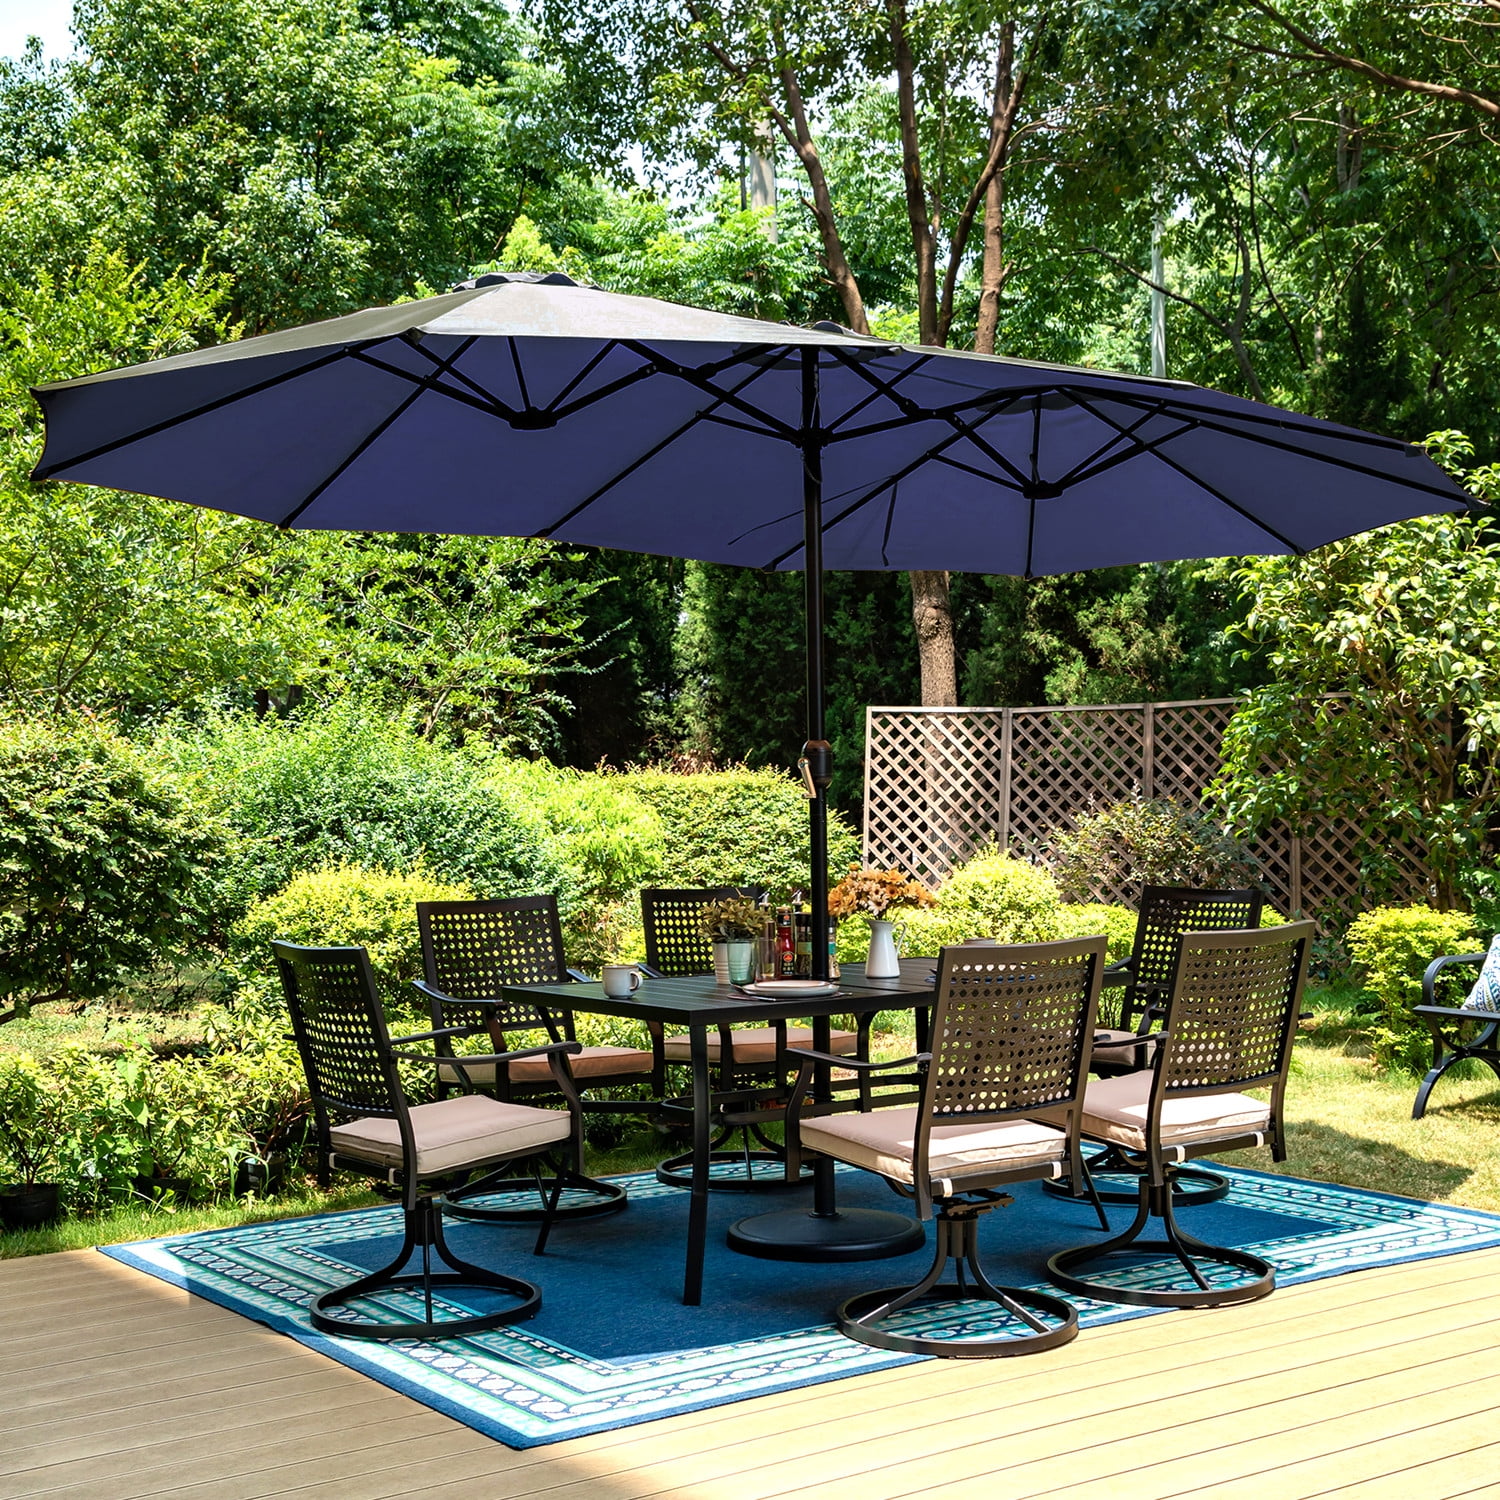 Details about   10' Hanging Solar LED Umbrella Patio Sun Shade Outdoor Market W/Base Tan 